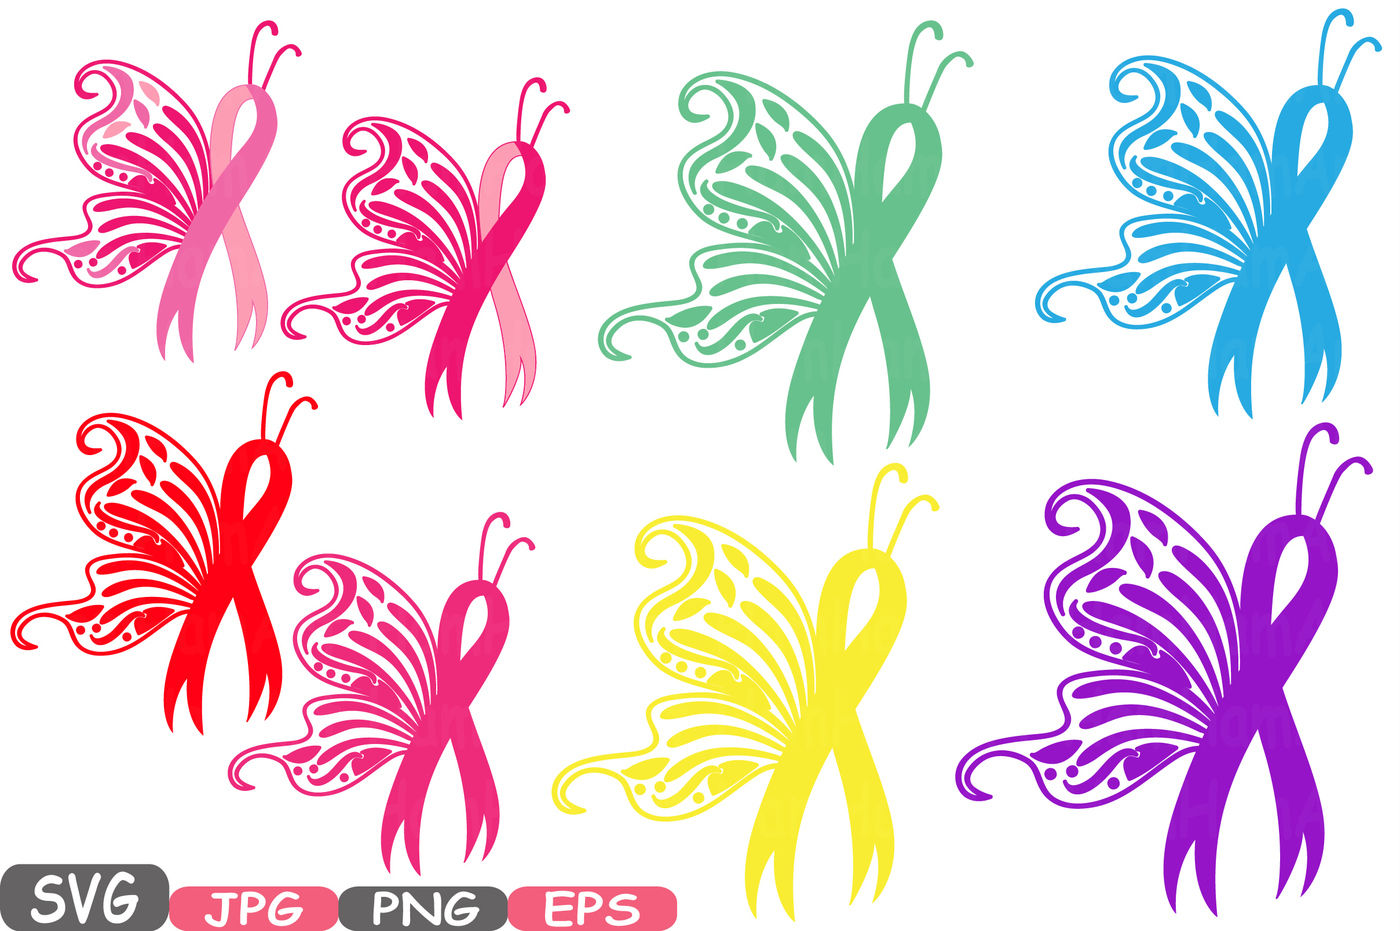 Download Breast Cancer Butterfly Svg Cricut Silhouette Swirl Props Cutting Files Awareness Cancer Survivor Clipart Digital Svg Eps Vinyl Autism 544s By Hamhamart Thehungryjpeg Com